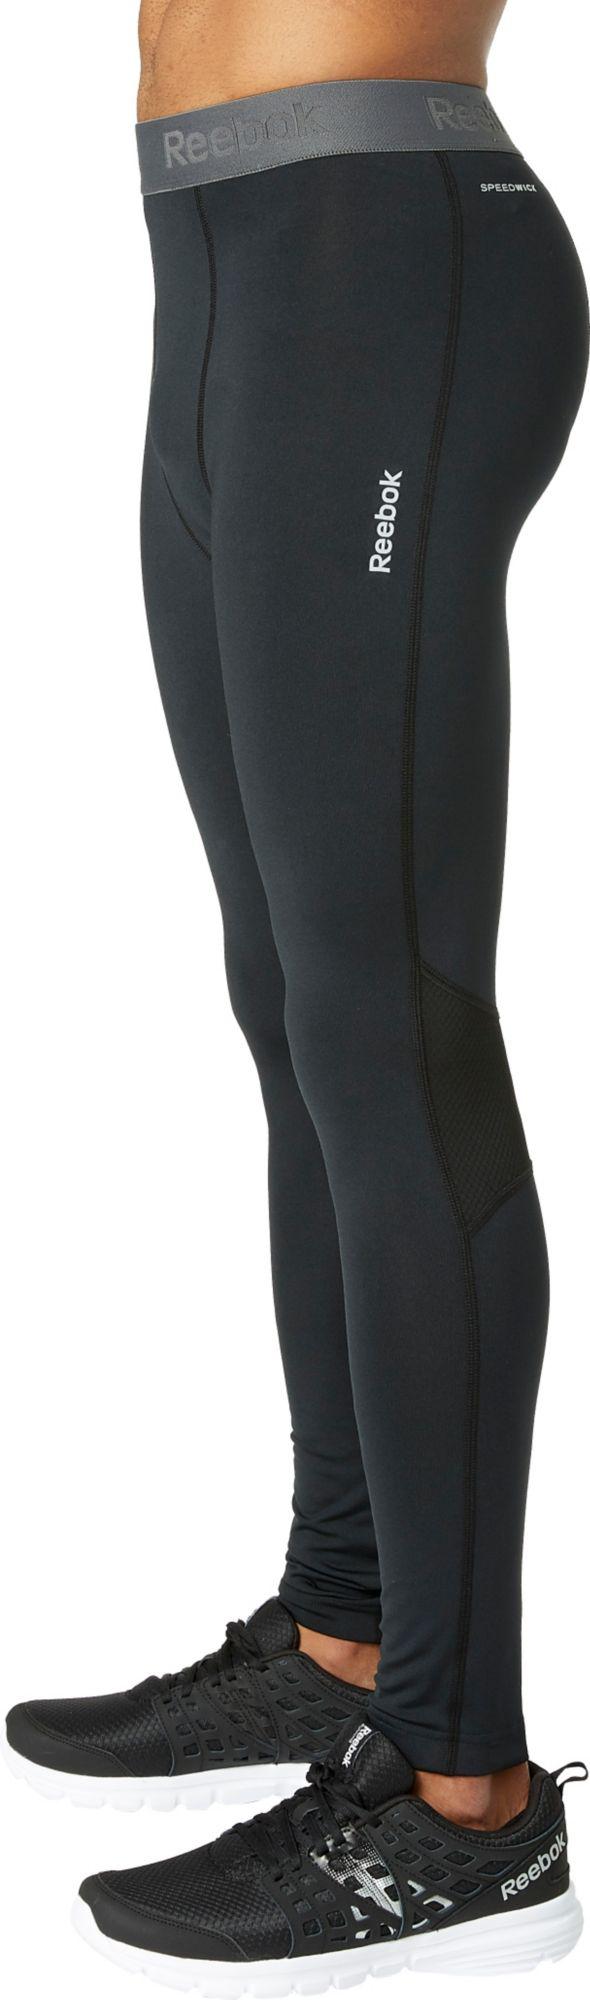 Reebok Men's Cold Weather Compression Tights Online, SAVE 45% -  aveclumiere.com